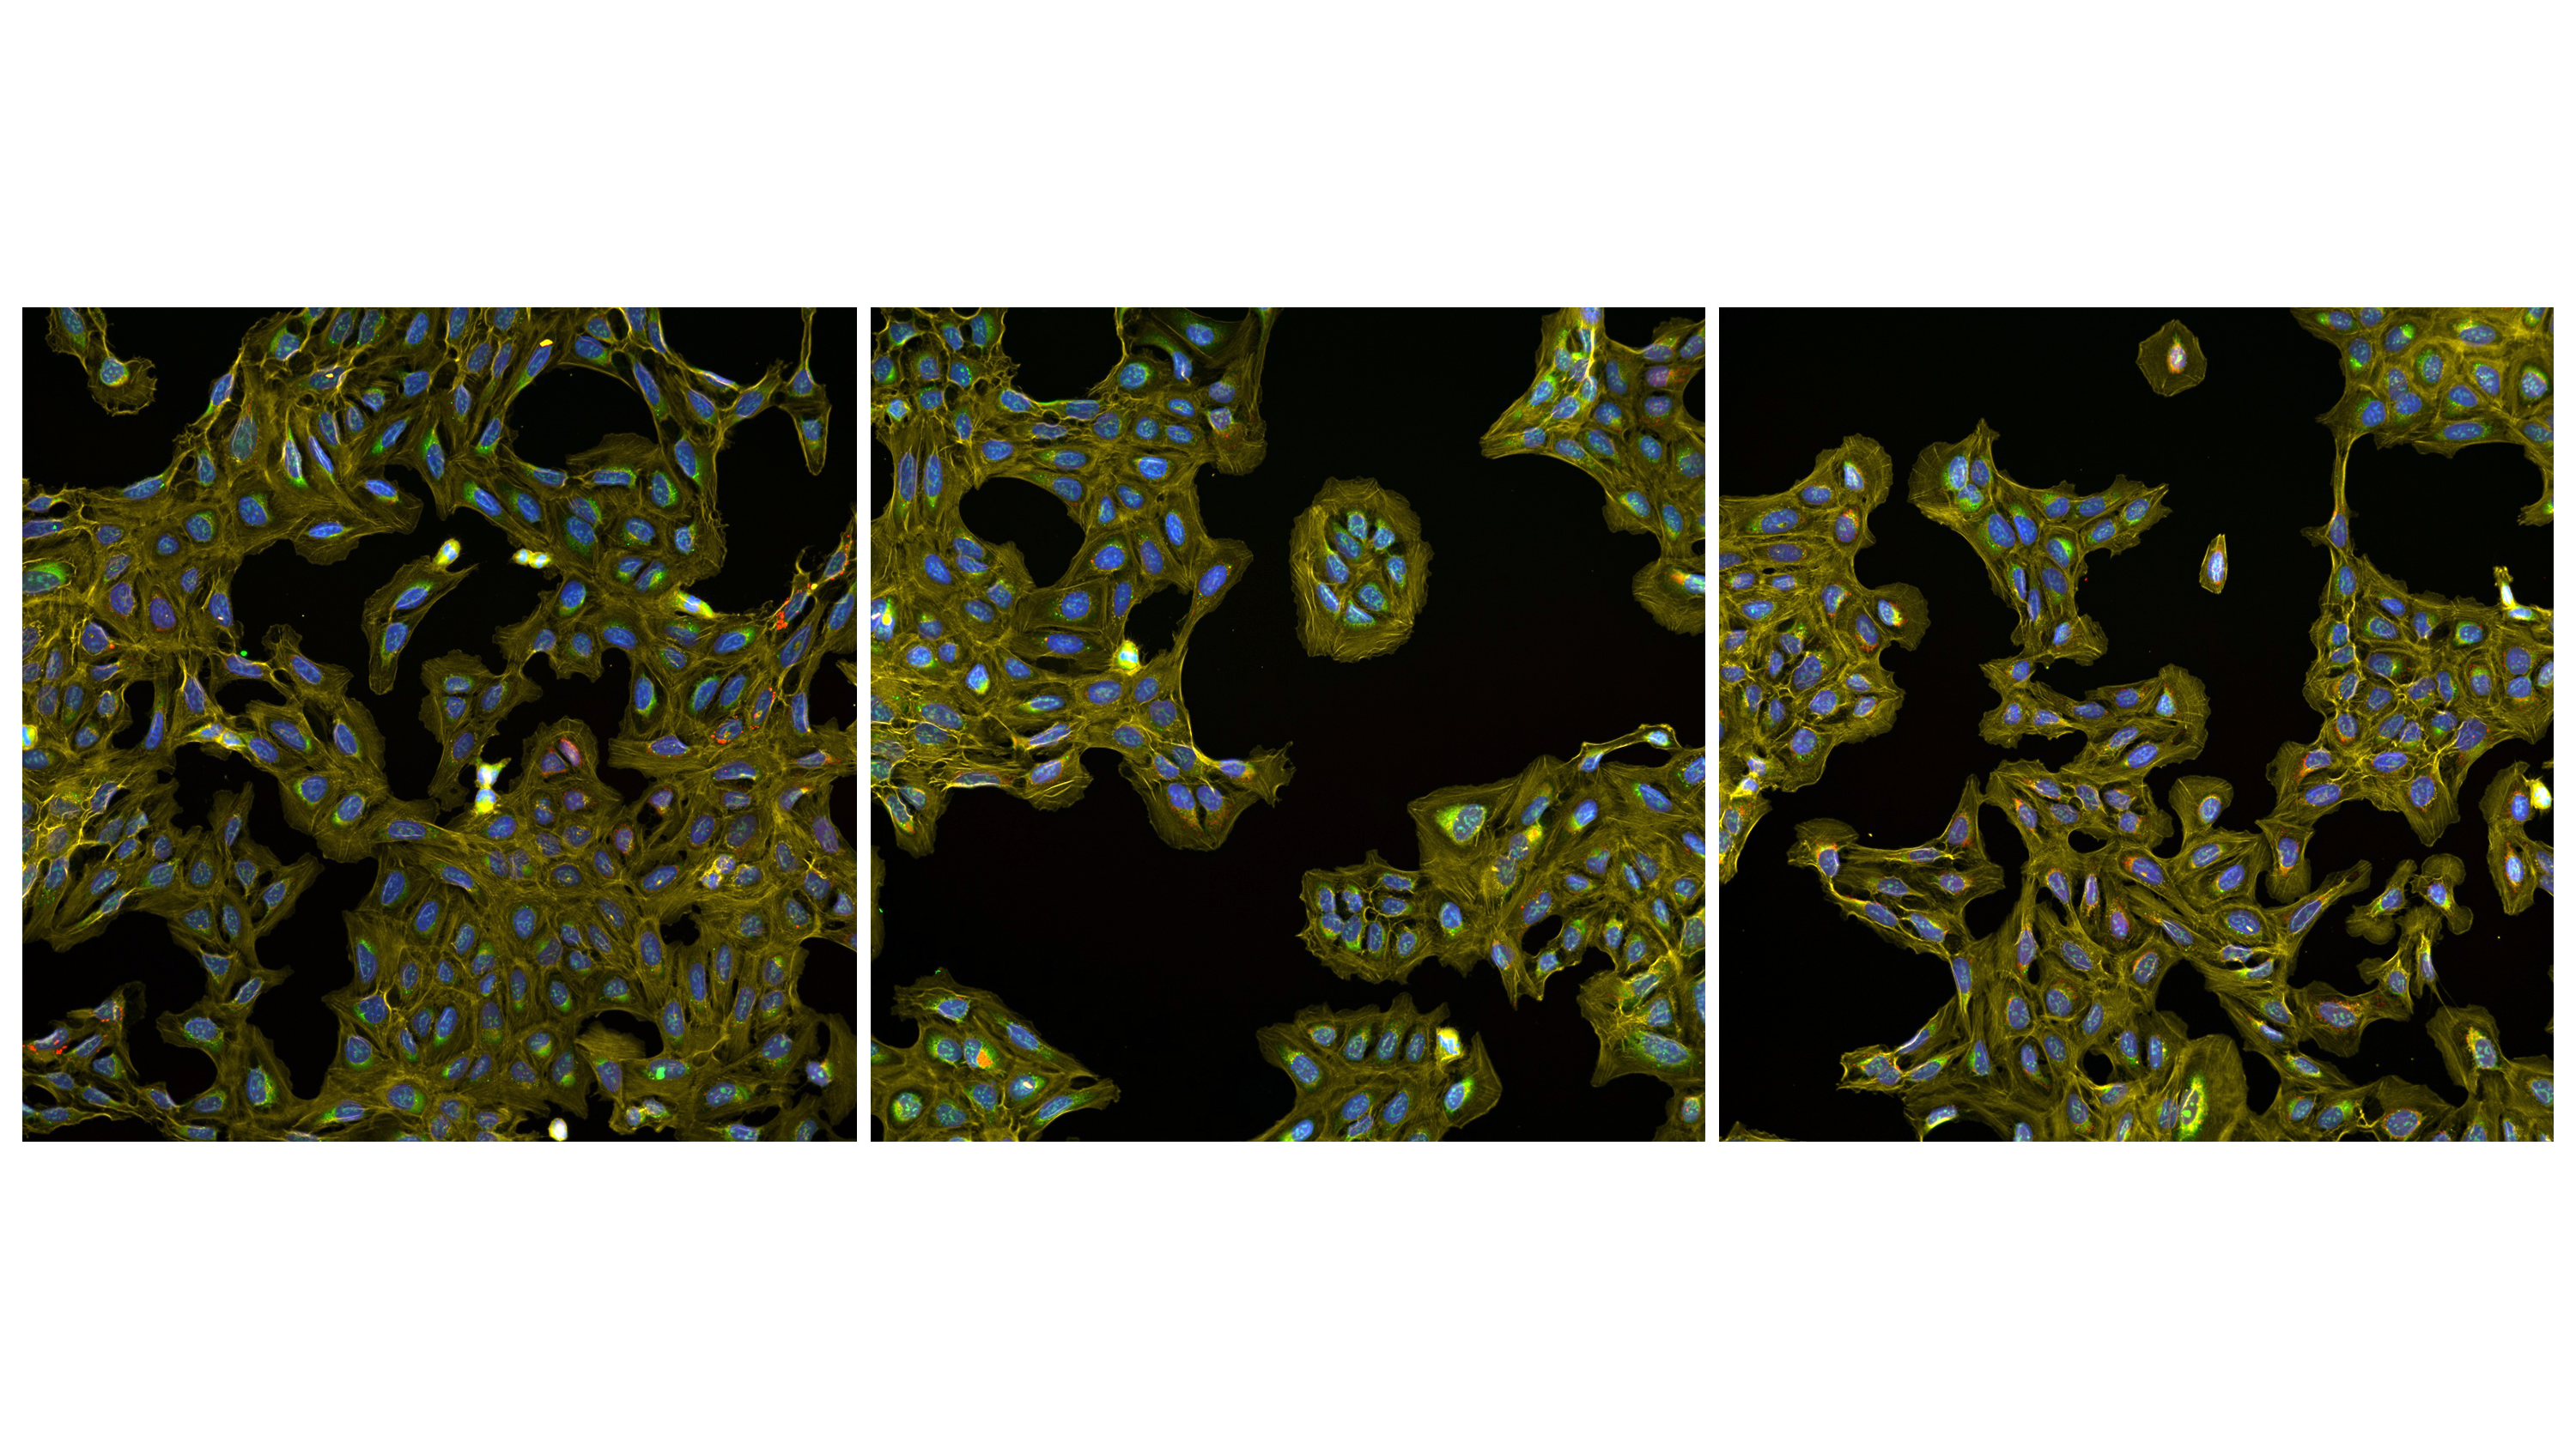 3 research images of cells